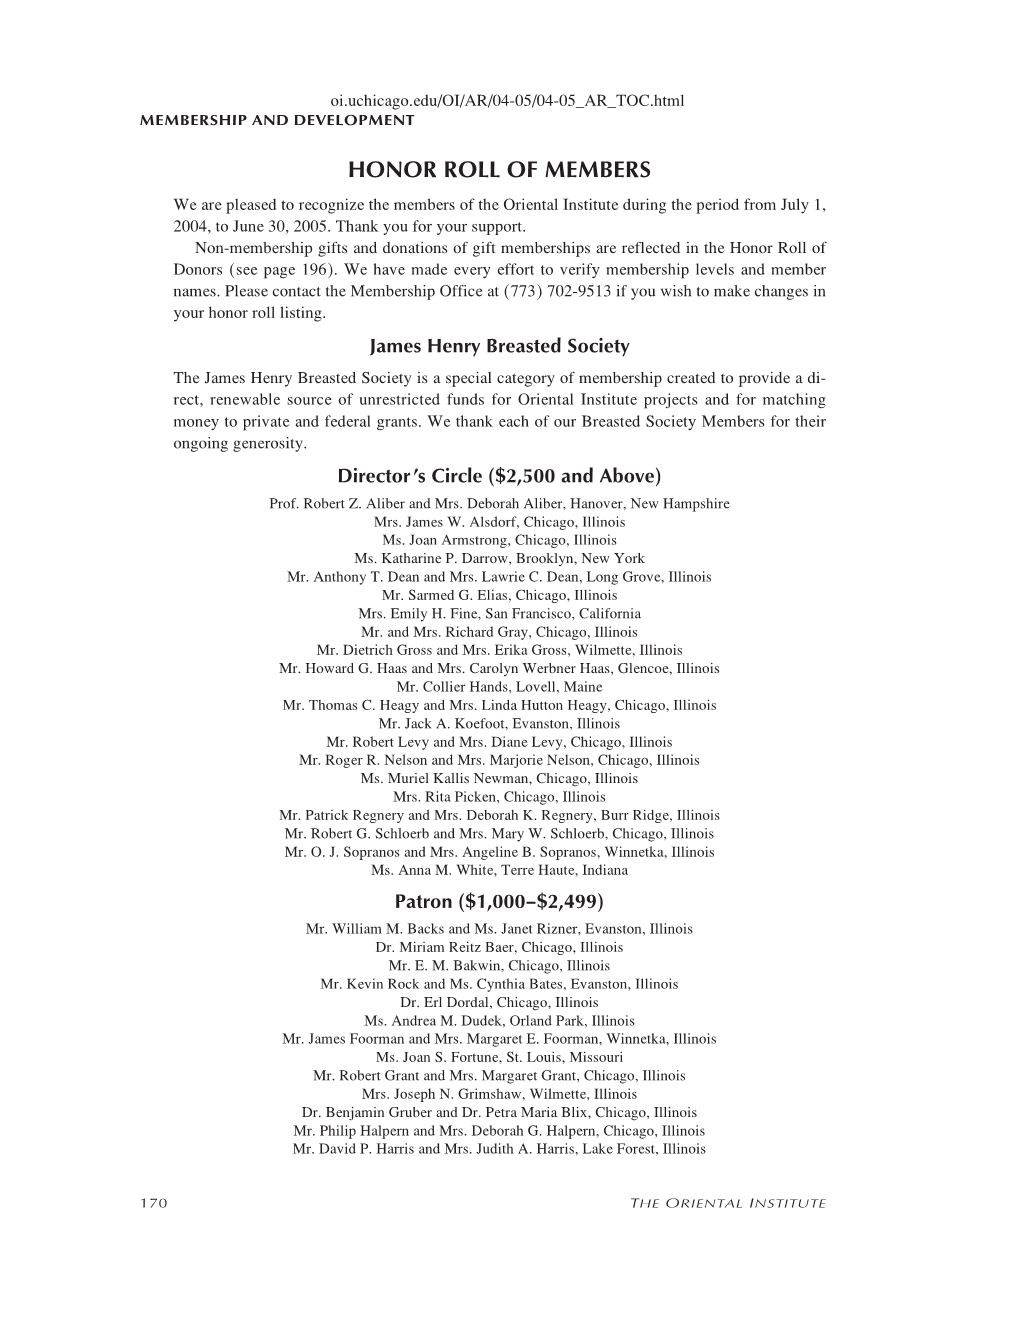 HONOR ROLL of MEMBERS We Are Pleased to Recognize the Members of the Oriental Institute During the Period from July 1, 2004, to June 30, 2005